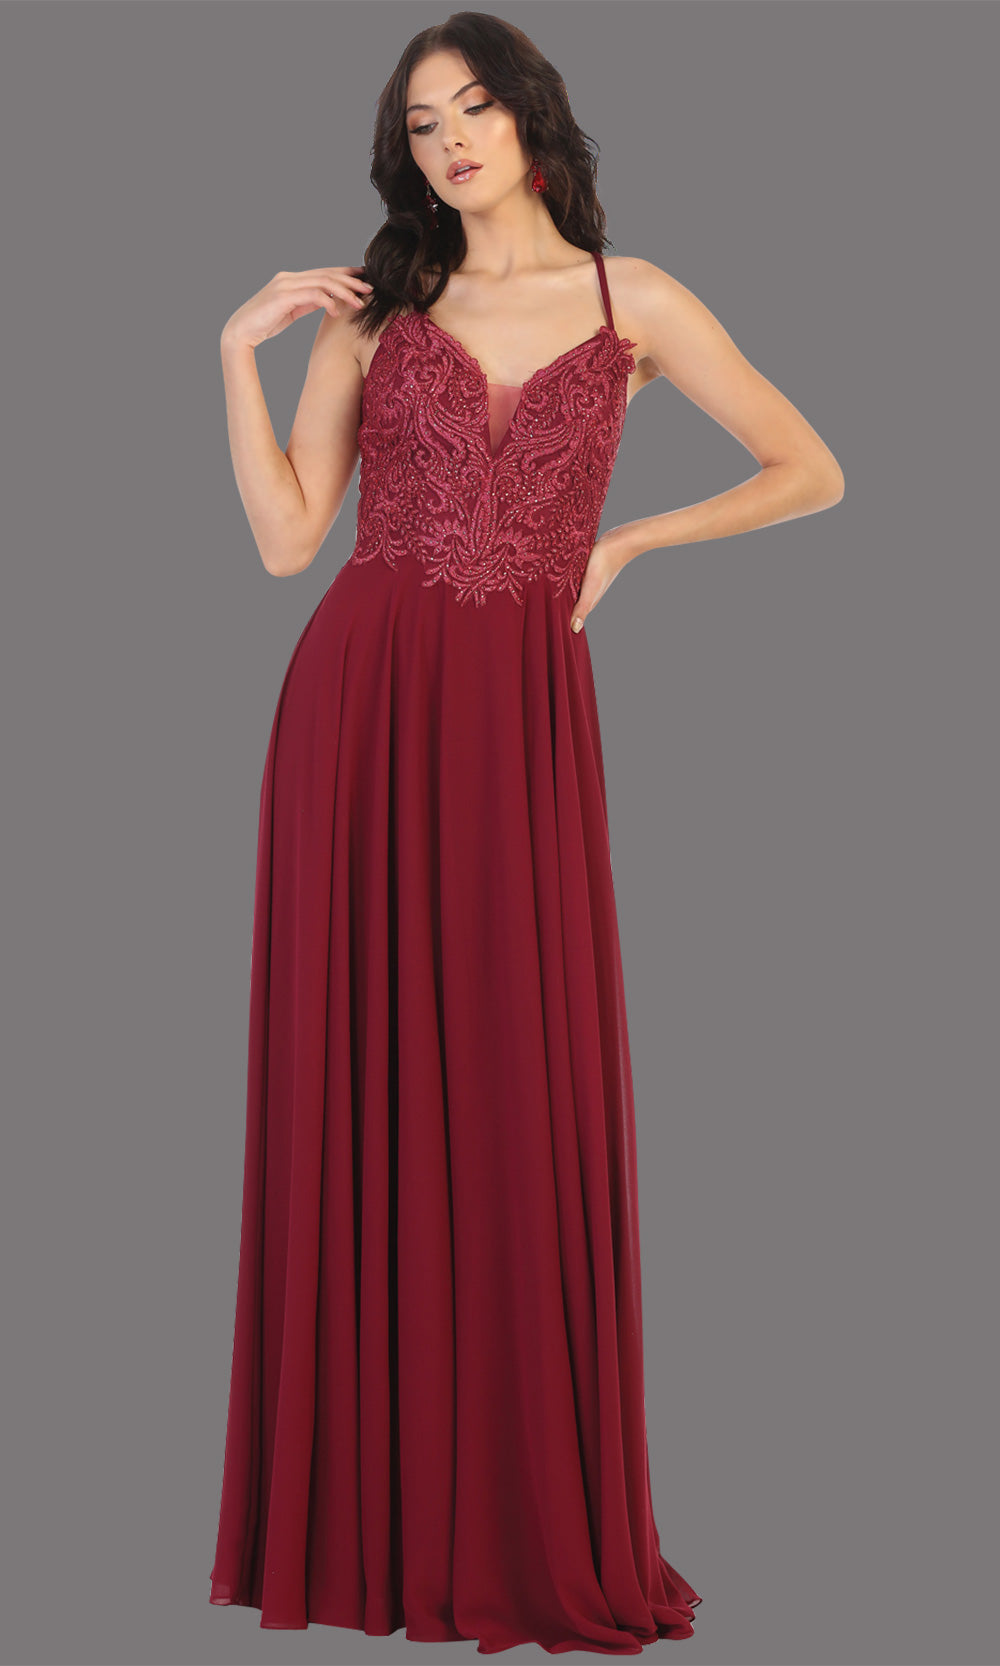 Mayqueen MQ1750 long burgundy flowy sleek & sexy dress w/straps. This dark red dress is perfect for bridesmaid dresses, simple wedding guest dress, prom dress, gala, black tie wedding. Plus sizes are available, evening party dress.jpg